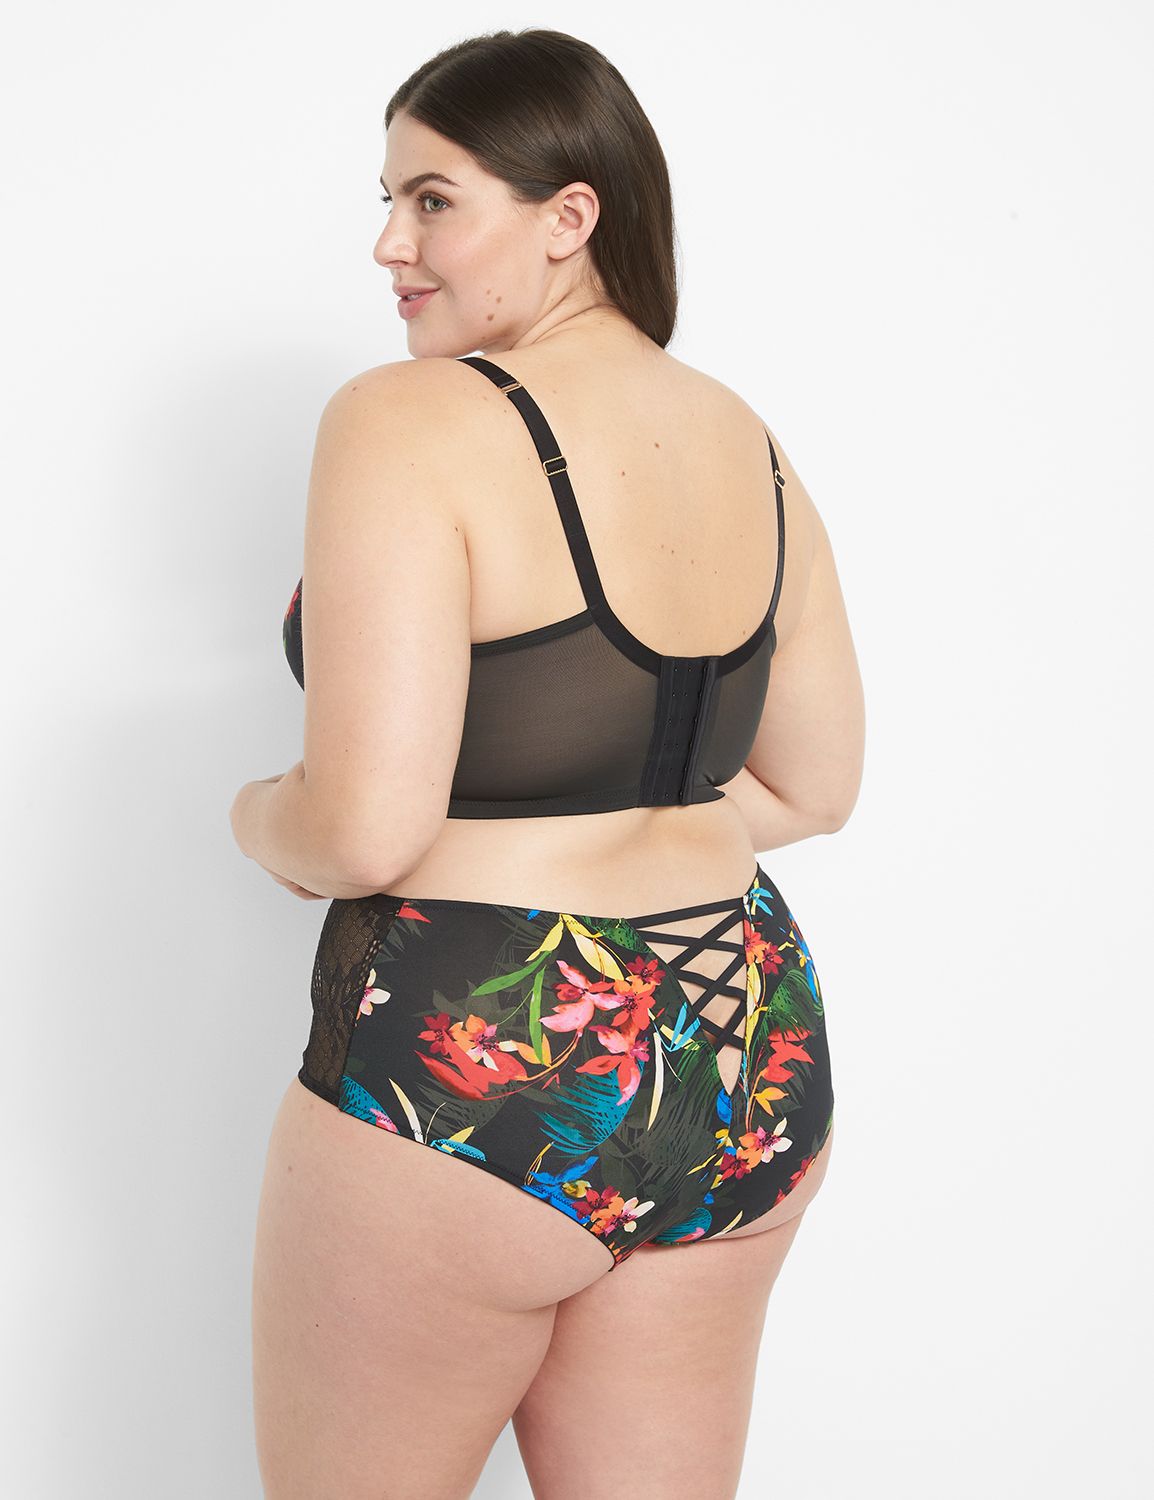 Lane Bryant French Brief Panty / Blurry Floral Black